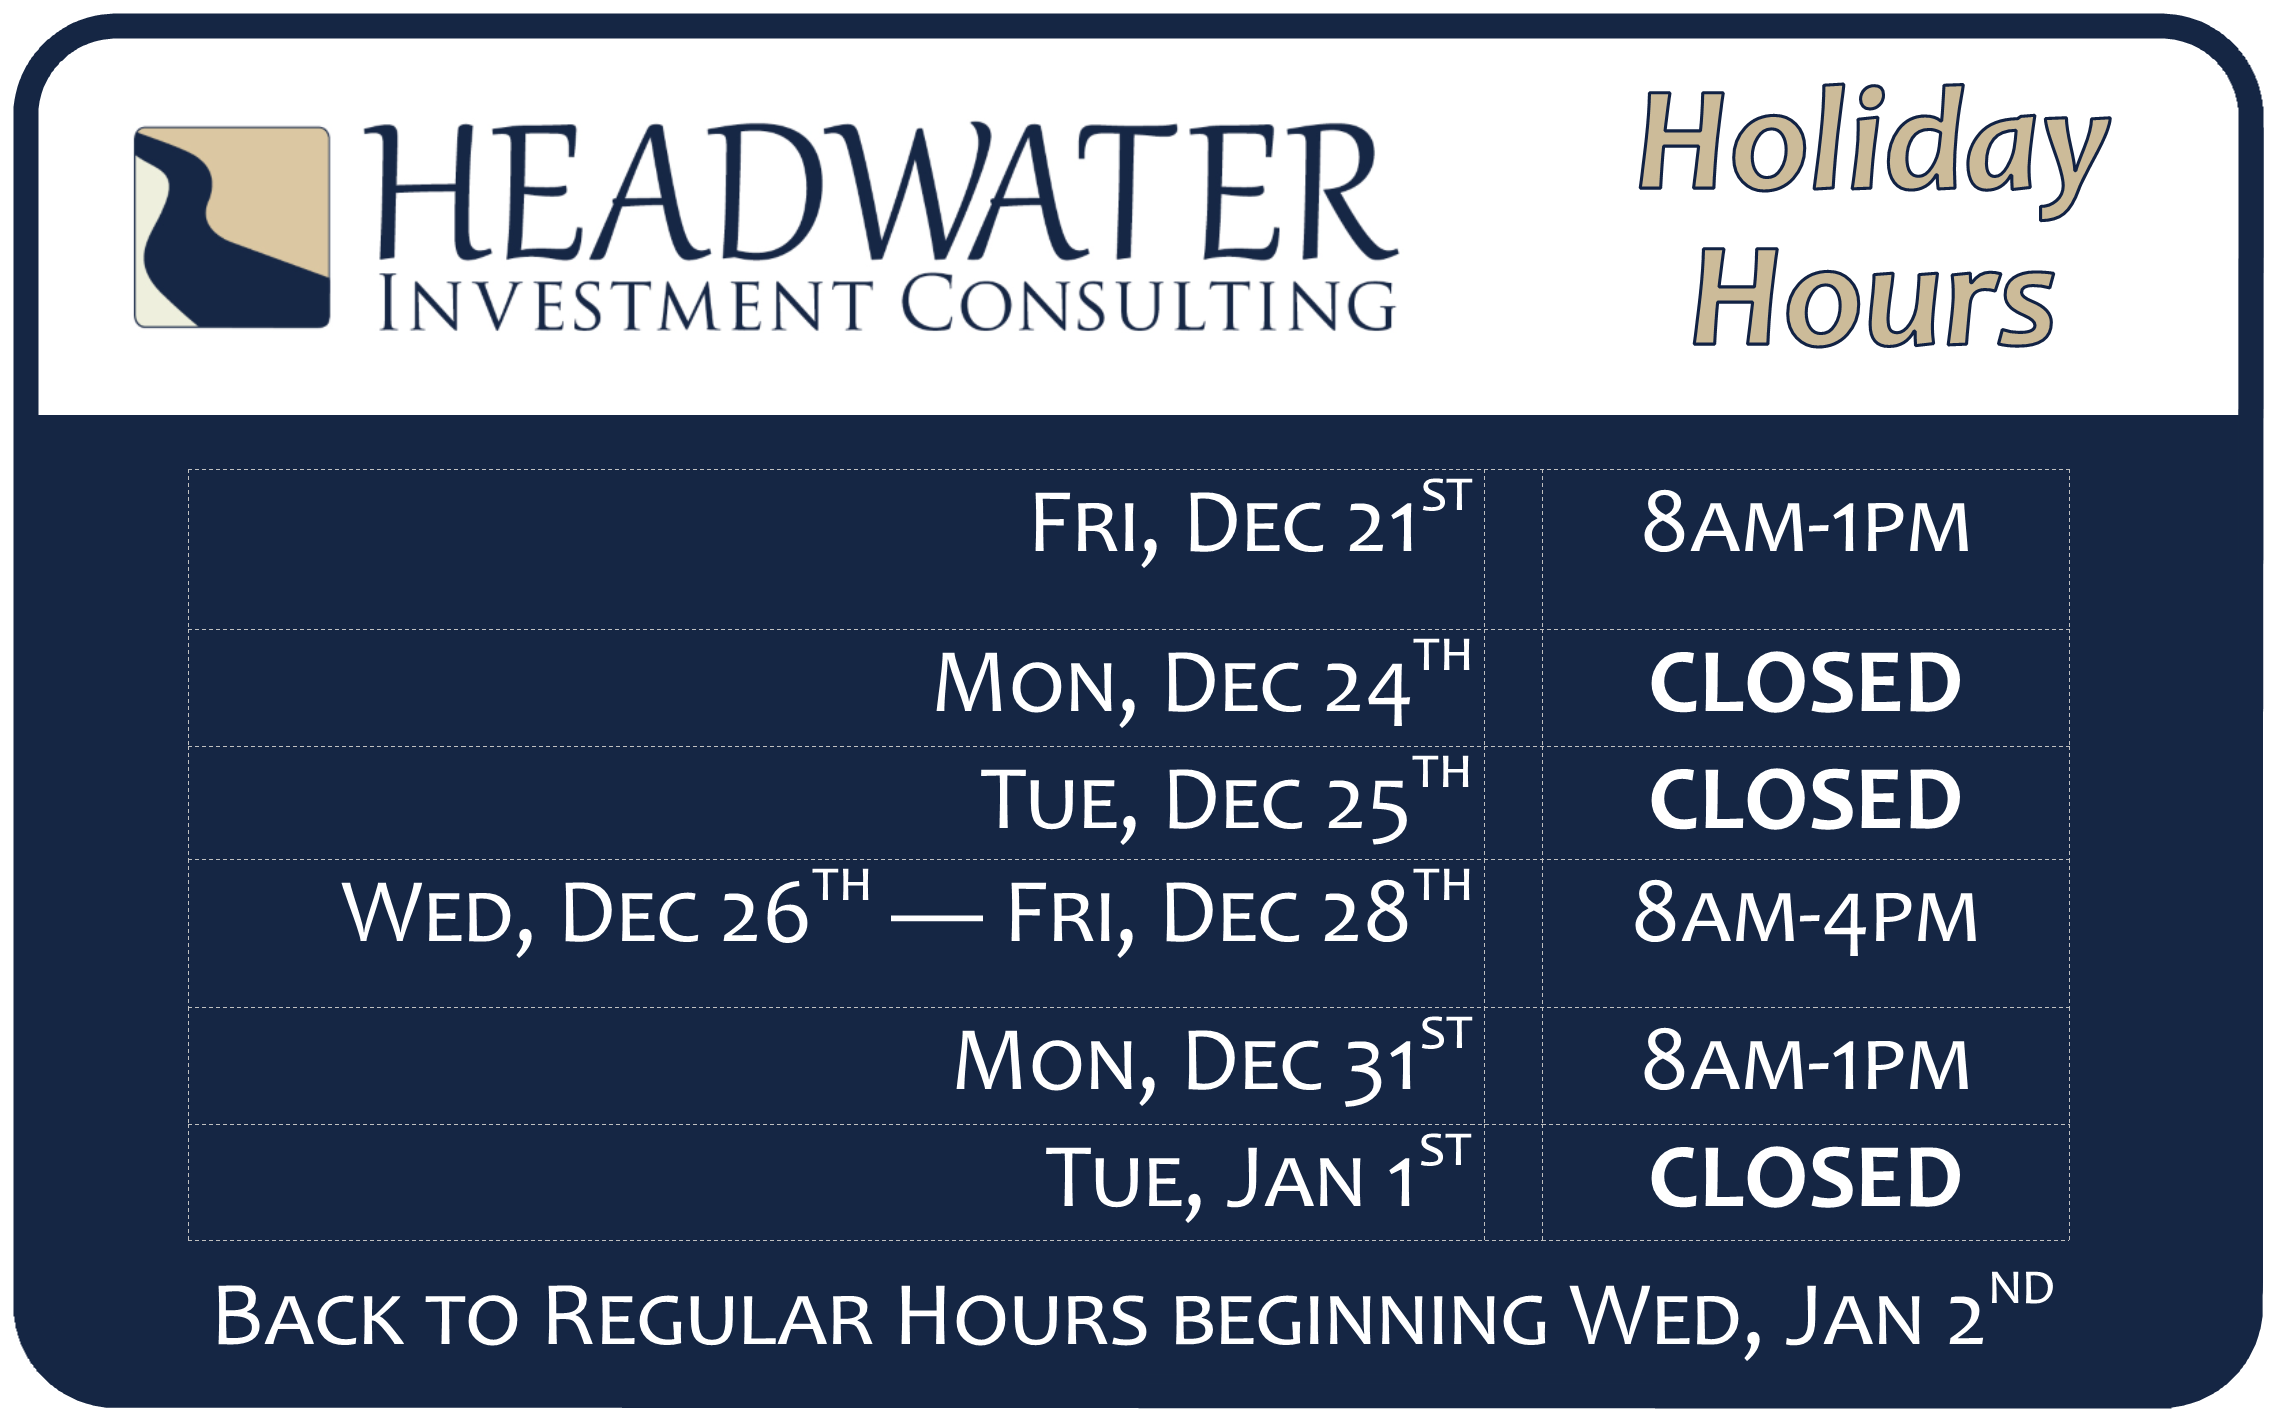 Holiday Hours for December 21-January 1